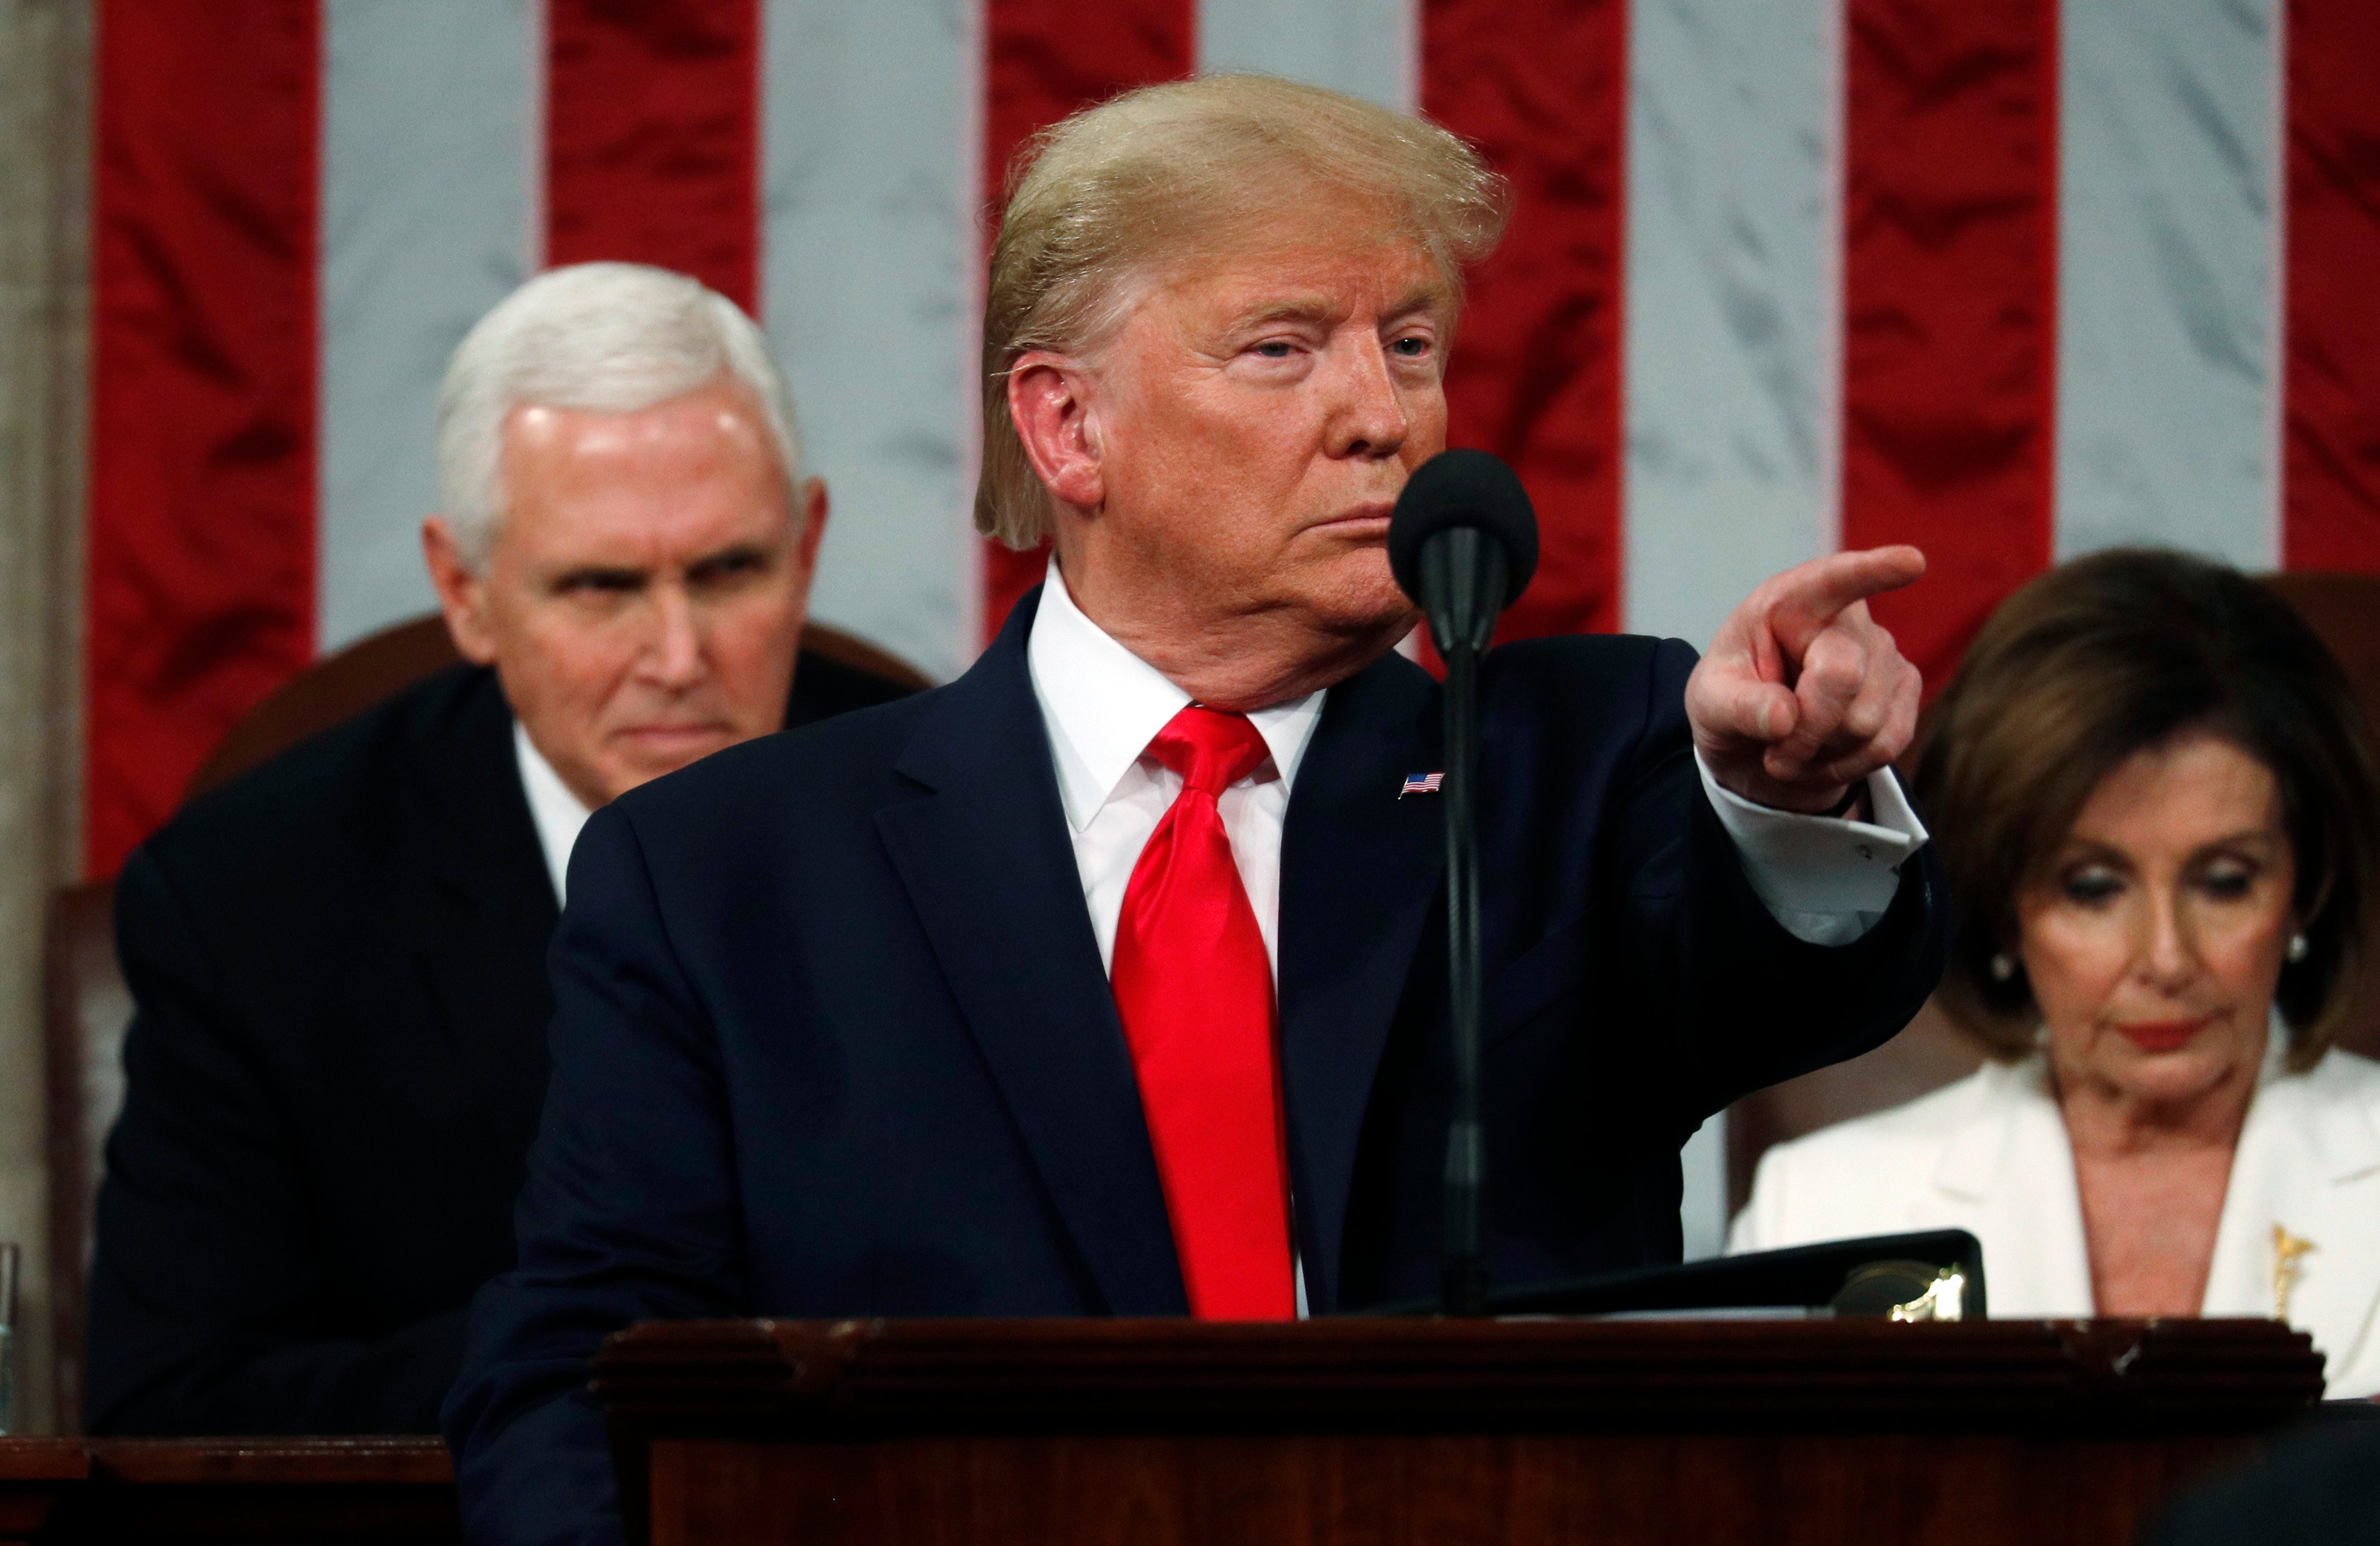 WASHINGTON, DC - FEBRUARY 04: U.S. President Donald Trump delivers the State of the Union address in the House chamber on February 4, 2020 in Washington, DC. Trump is delivering his third State of the Union address on the night before the U.S. Senate is set to vote in his impeachment trial. (Photo by Leah Millis-Pool/Getty Images)